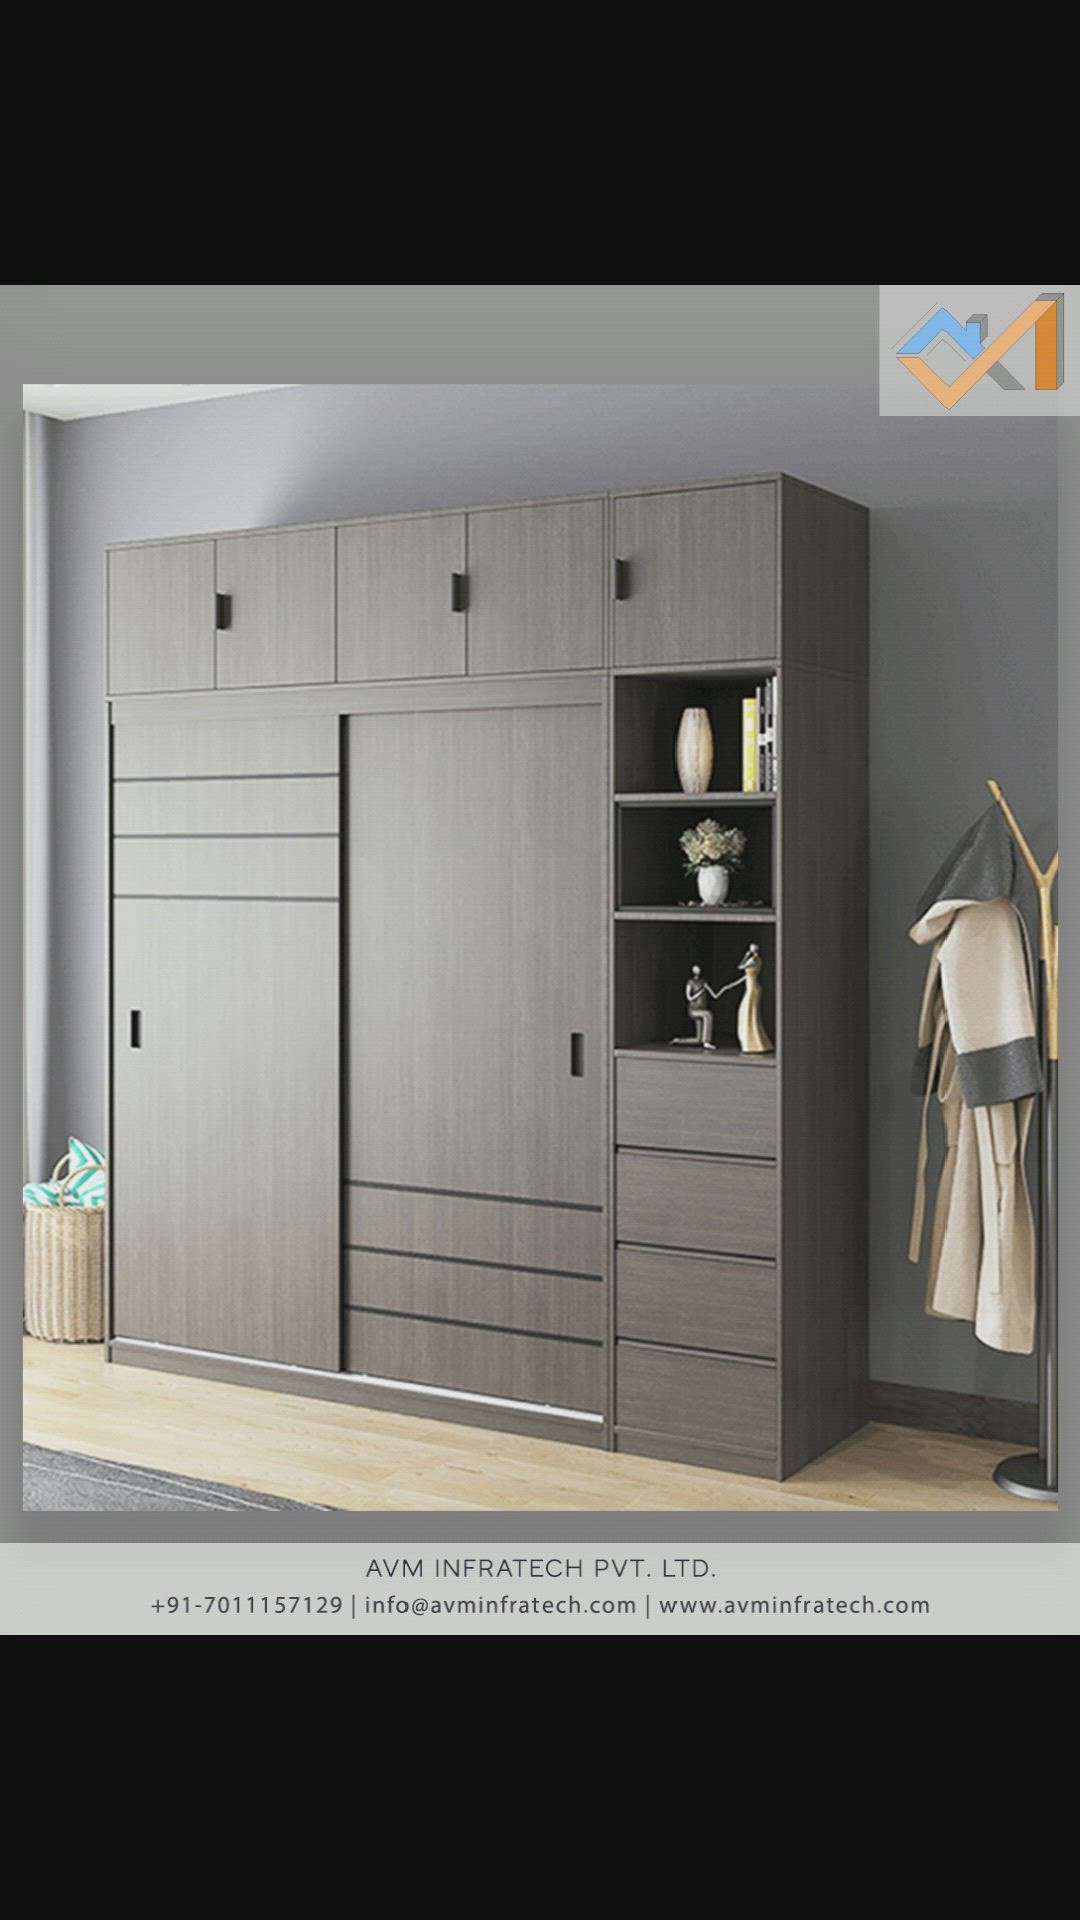 Modular wardrobes are modern-day closets with hanging space, drawers that make it convenient for us to arrange our belongings in a proper manner.


Follow us for more such amazing updates. 
.
.
#moderndesign #modular #modularwardrobe #wardrobe #almirah #architect #architecture #interior #interiordesign #rooms #clothing #fashion #trendy #latest #modern